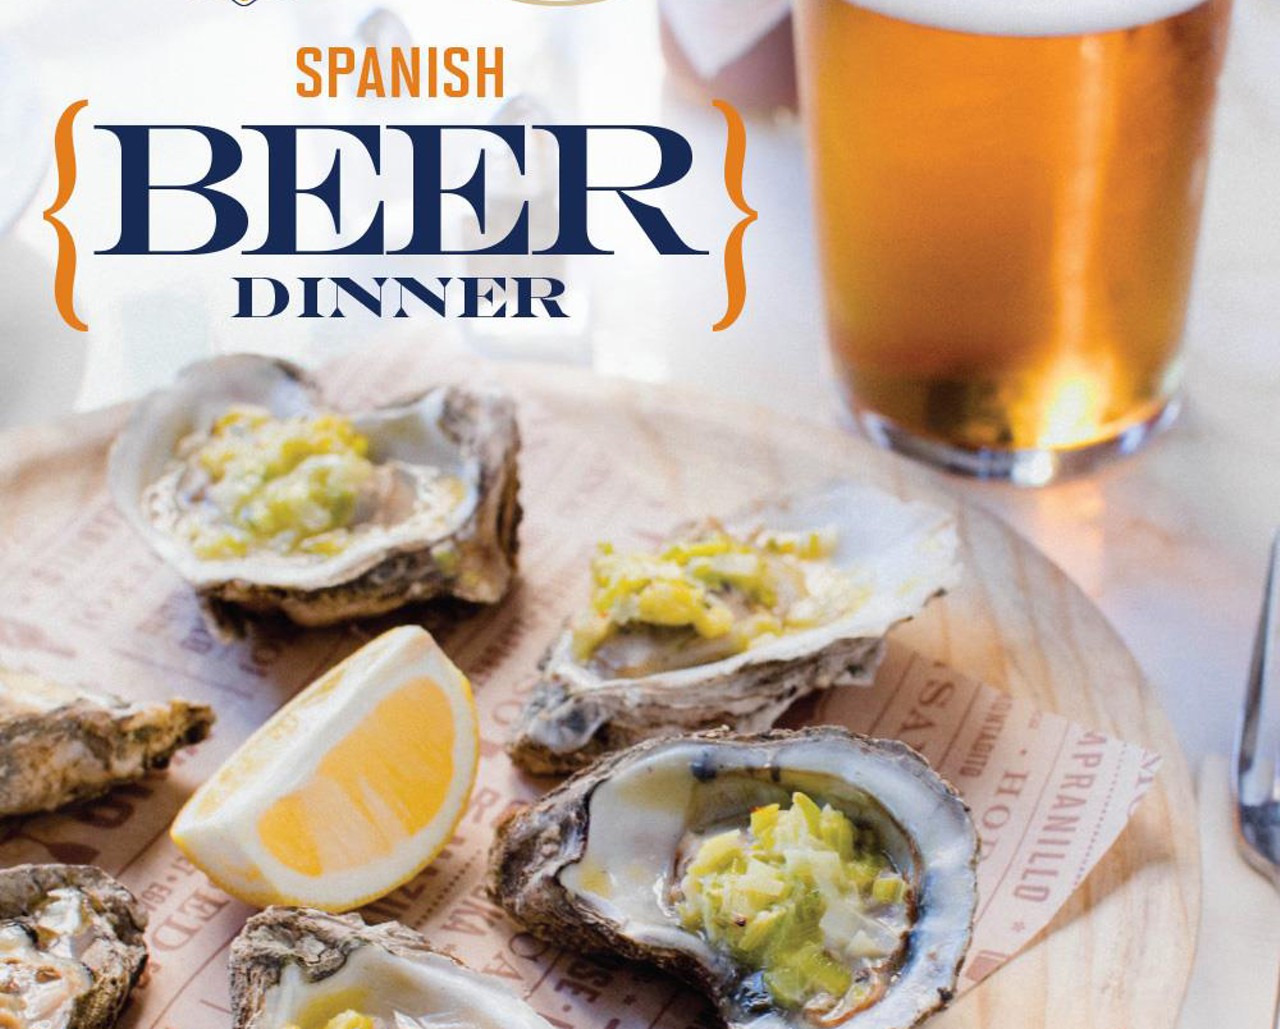 Spanish Beer Dinner at Bulla Gastrobar in TampaThurs., Mar. 7, 6-8 p.m.
Photo via the Facebook event page